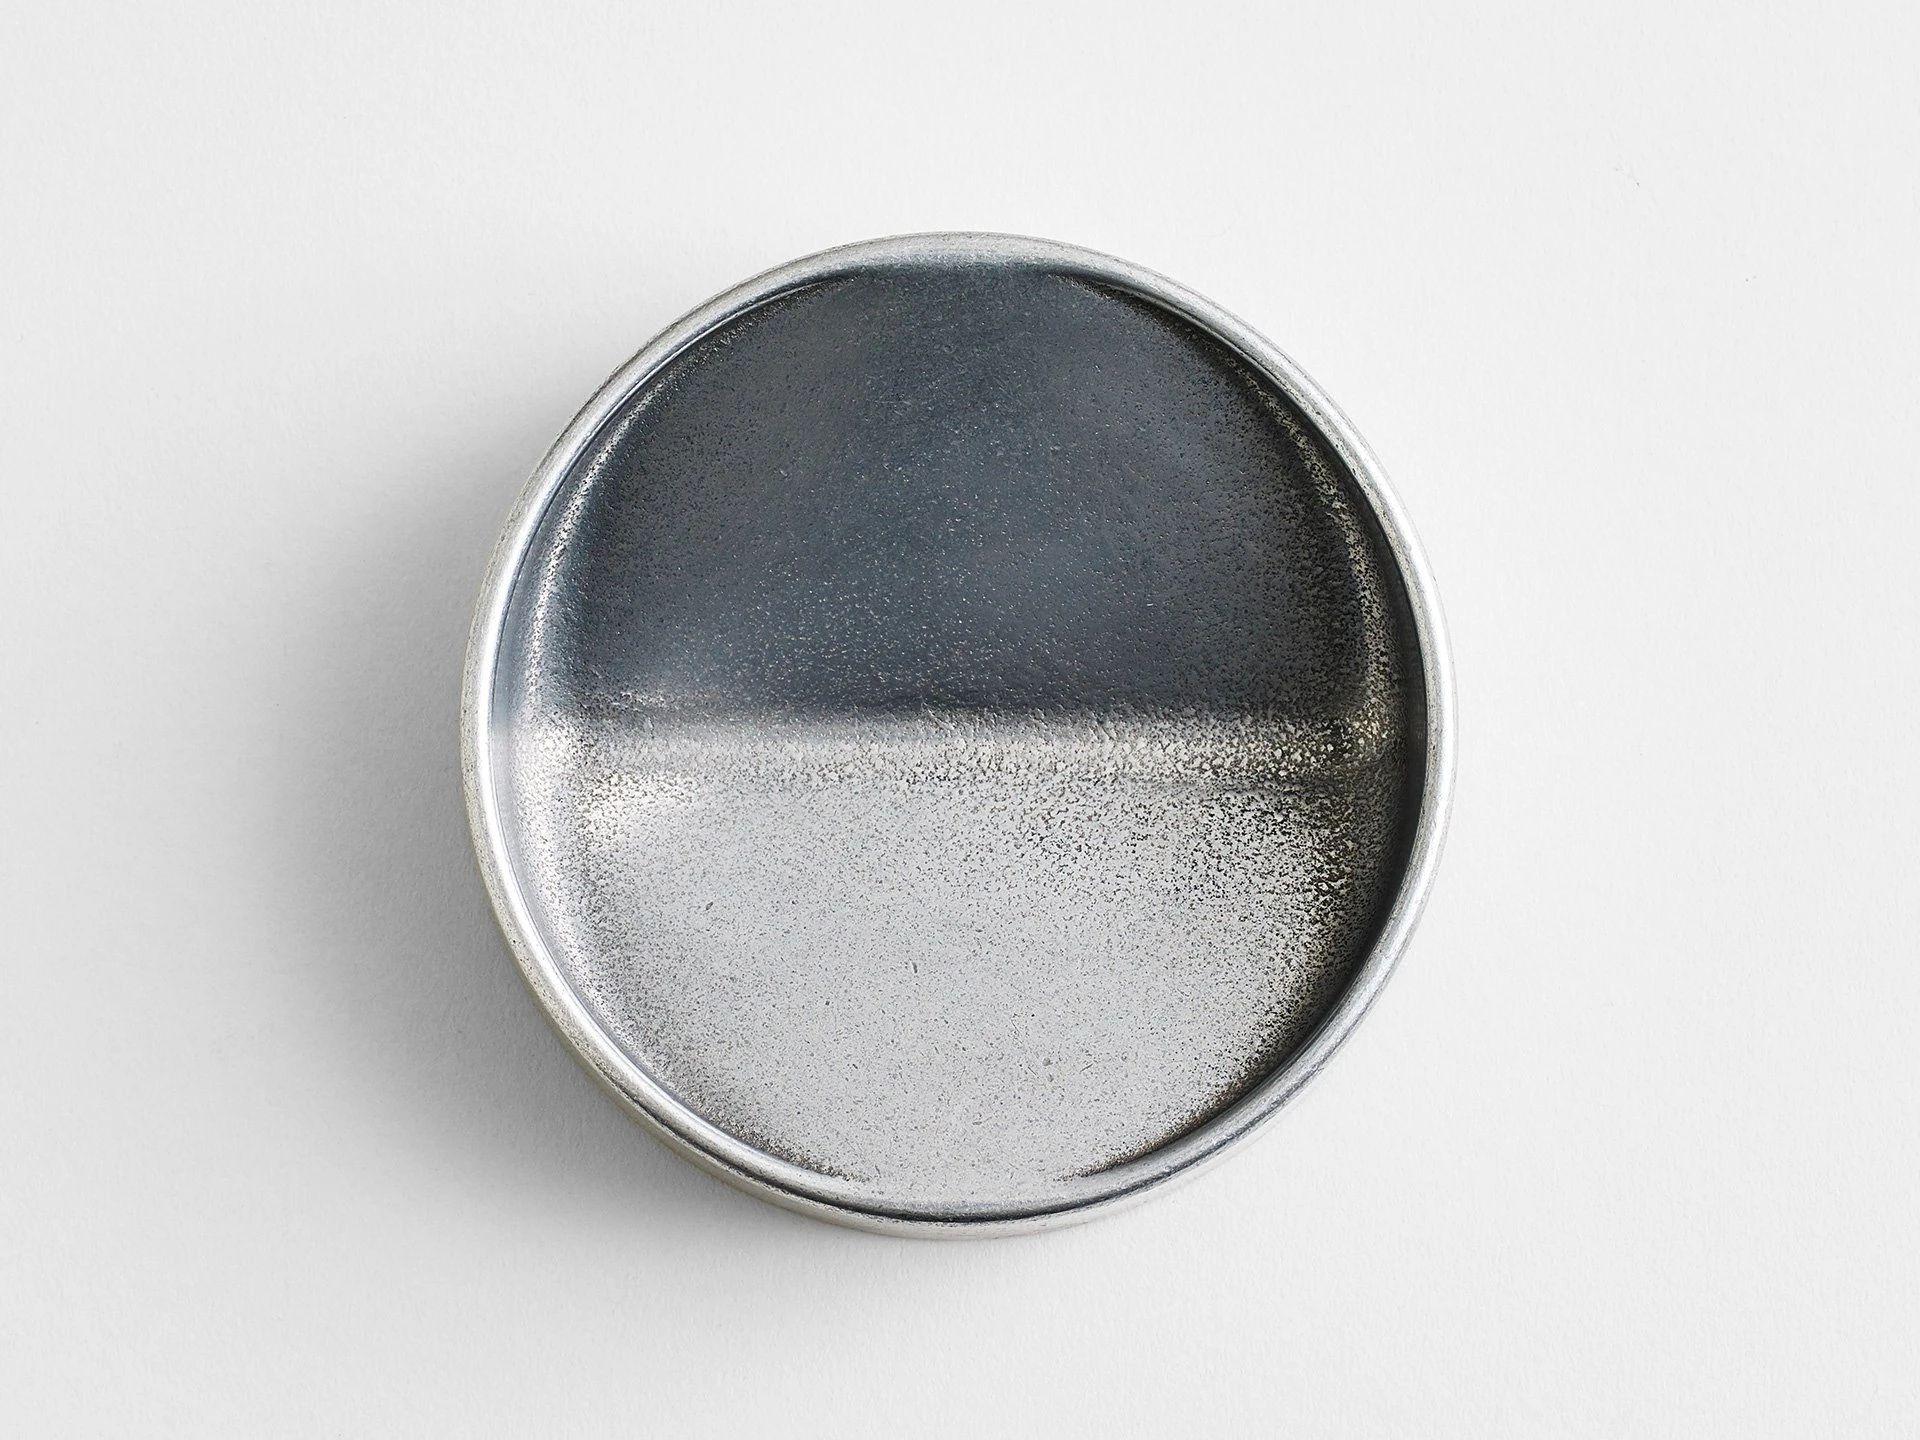 Aluminum Vide Poche Rond by Henry Wilson
Dimensions: D 13 x H 4 cm 
Materials: Aluminum

Discard your day at the door.

Your Vide Poche is designed with your loose-pocket items in mind – think keys, change and phone. It is made, polished and